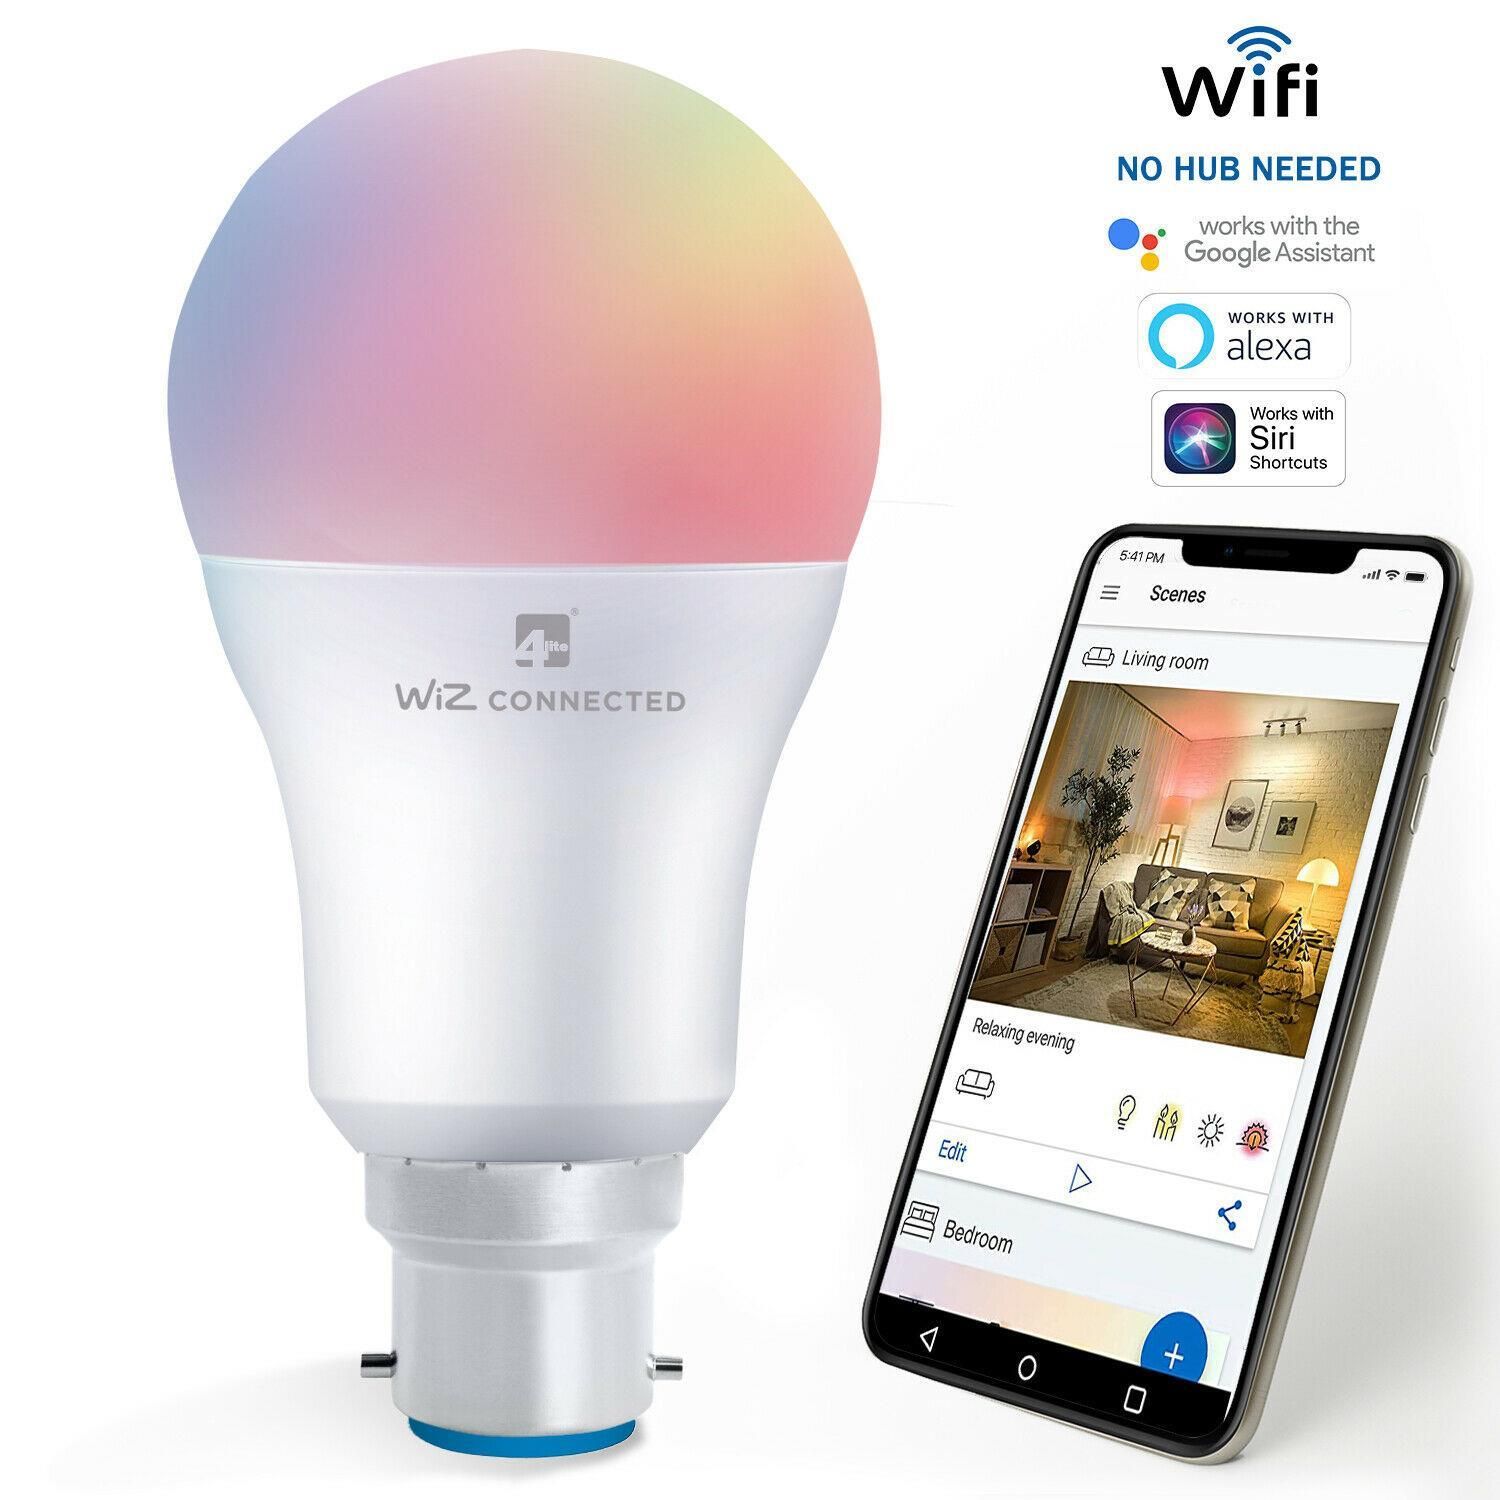 WiZ LED A60 Smart Bulb Wifi & Bluetooth B22 RGBW Colours Tuneable White& Dimmable brings the ultimate light experience to your home, office or hospitality business. Retrofit into any lamp shade to create the ambience of your choice. Wi-Fi connected, 16 million colours and adjustable from warm white to daylight.

You’ll be able to adjust your full colour, warm white and daylight white LED light bulb to fit the mood, as it’s fully dimmable. With 806 lumens and a Kelvin colour temperature of 6500, it’s perfect for every room in your home. It has an impressive lifetime of 25,000 hours, so you don’t have to worry about changing it regularly.

If you have other compatible smart devices, you can connect your bulb via IFTTT. You’ll be able to set up your WiZ WZ20826081 to suit your needs. Have the light pulse when you receive a text message or if someone knocks at the front door. You can also input your daily schedule, so your WiZ lights change accordingly.

Wi-Fi enabled, you can use your Apple or Android smartphone to control the WiZ WZ20826081. Simply download the app through the iOS App Store or the Google Store – it’s that easy. Or, if you prefer, you can use your Google Home or Amazon Alexa speaker with the bulb. As long as you have internet access, you can control it from wherever you are. It’s great for when you arrive at work and realise that you’ve left a light on at home.

Equivalent to a 60W bulb and rated ‘A’ for energy usage, the WiZ WZ20826081 is kind on the planet and your pocket. Plus, you’ll have a choice of where you want to fit your bulb, as it uses a B22 Bayonet screw fixing. From a lamp in the living room to a downlight in your kitchen, this lightbulb is the perfect choice

220-240V 50Hz, 9W 75mA,Encrypted cloud connection with TLS 1.2 security protocol ,Amazon Web Services, pre-subscribed for product’s lifetime
Anonymous sign-in Auth 2.0 secured frame work Connection to WiFi on 2.4 GHz frequency mode for wider coverage32-bit CPU